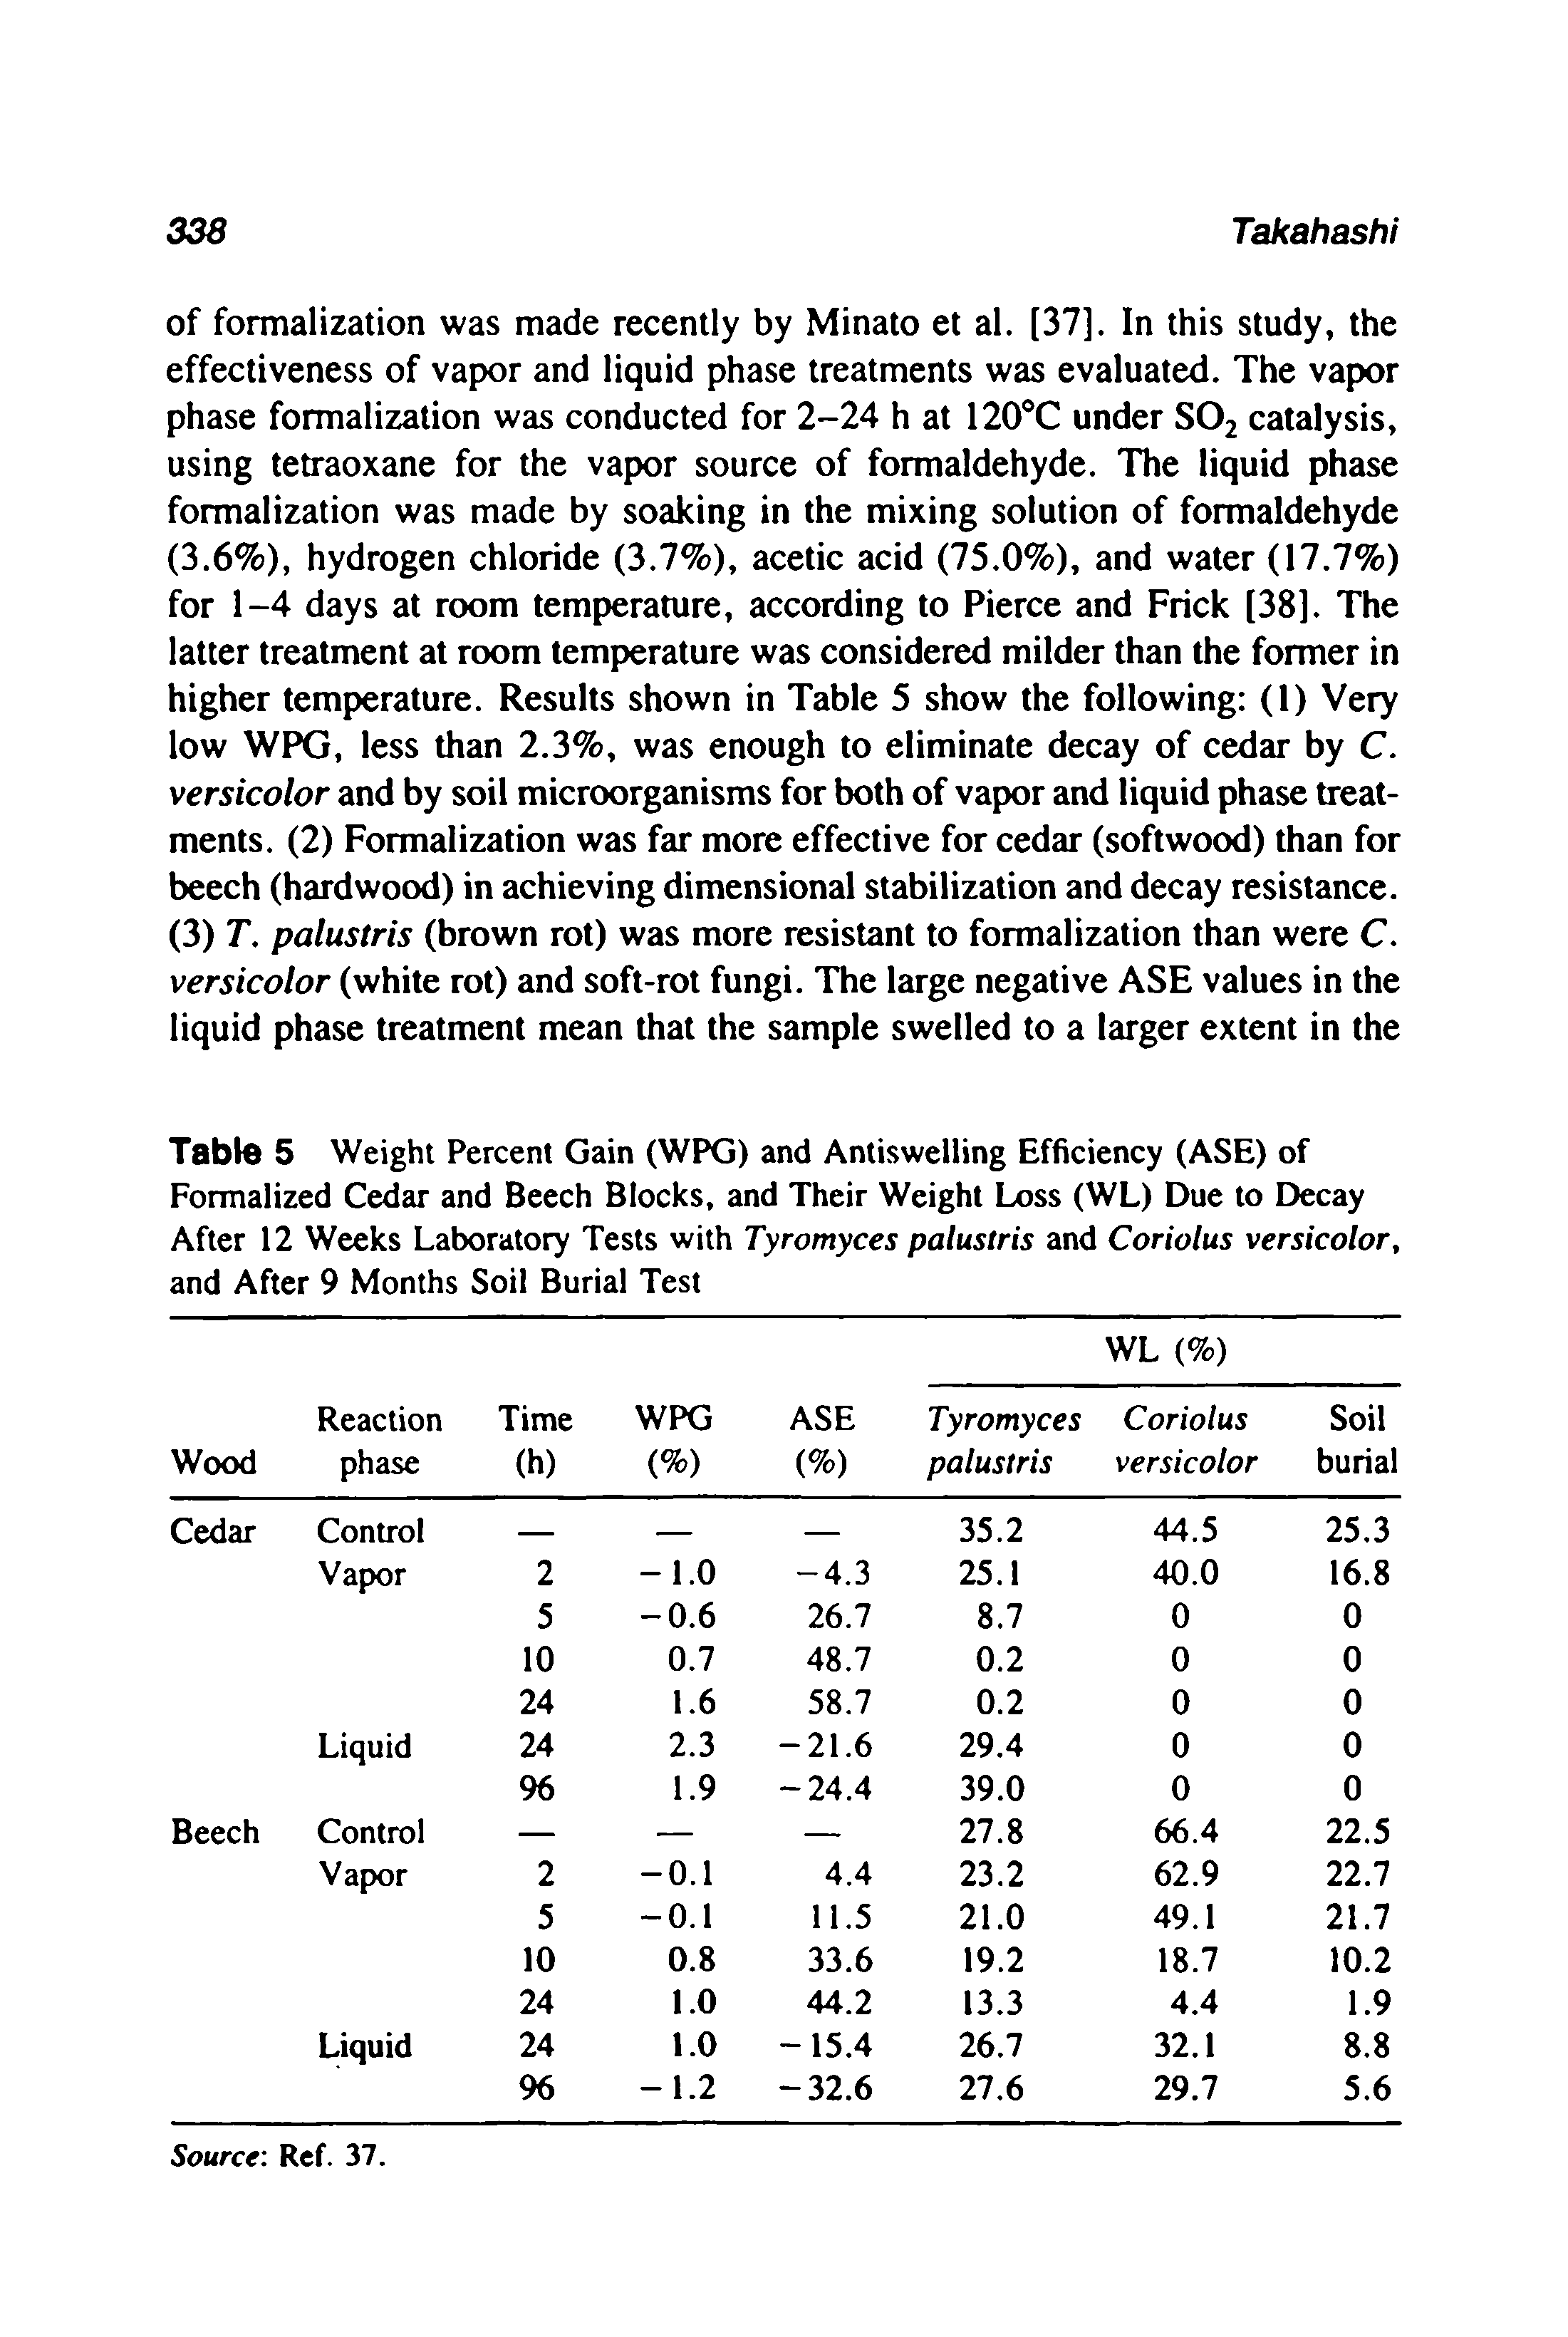 Table 5 Weight Percent Gain (WPG) and Antiswelling Efficiency (ASE) of Formalized Cedar and Beech Blocks, and Their Weight Loss (WL) Due to Decay After 12 Weeks Laboratory Tests with Tyromyces palustris and Coriolus versicolor, and After 9 Months Soil Burial Test...